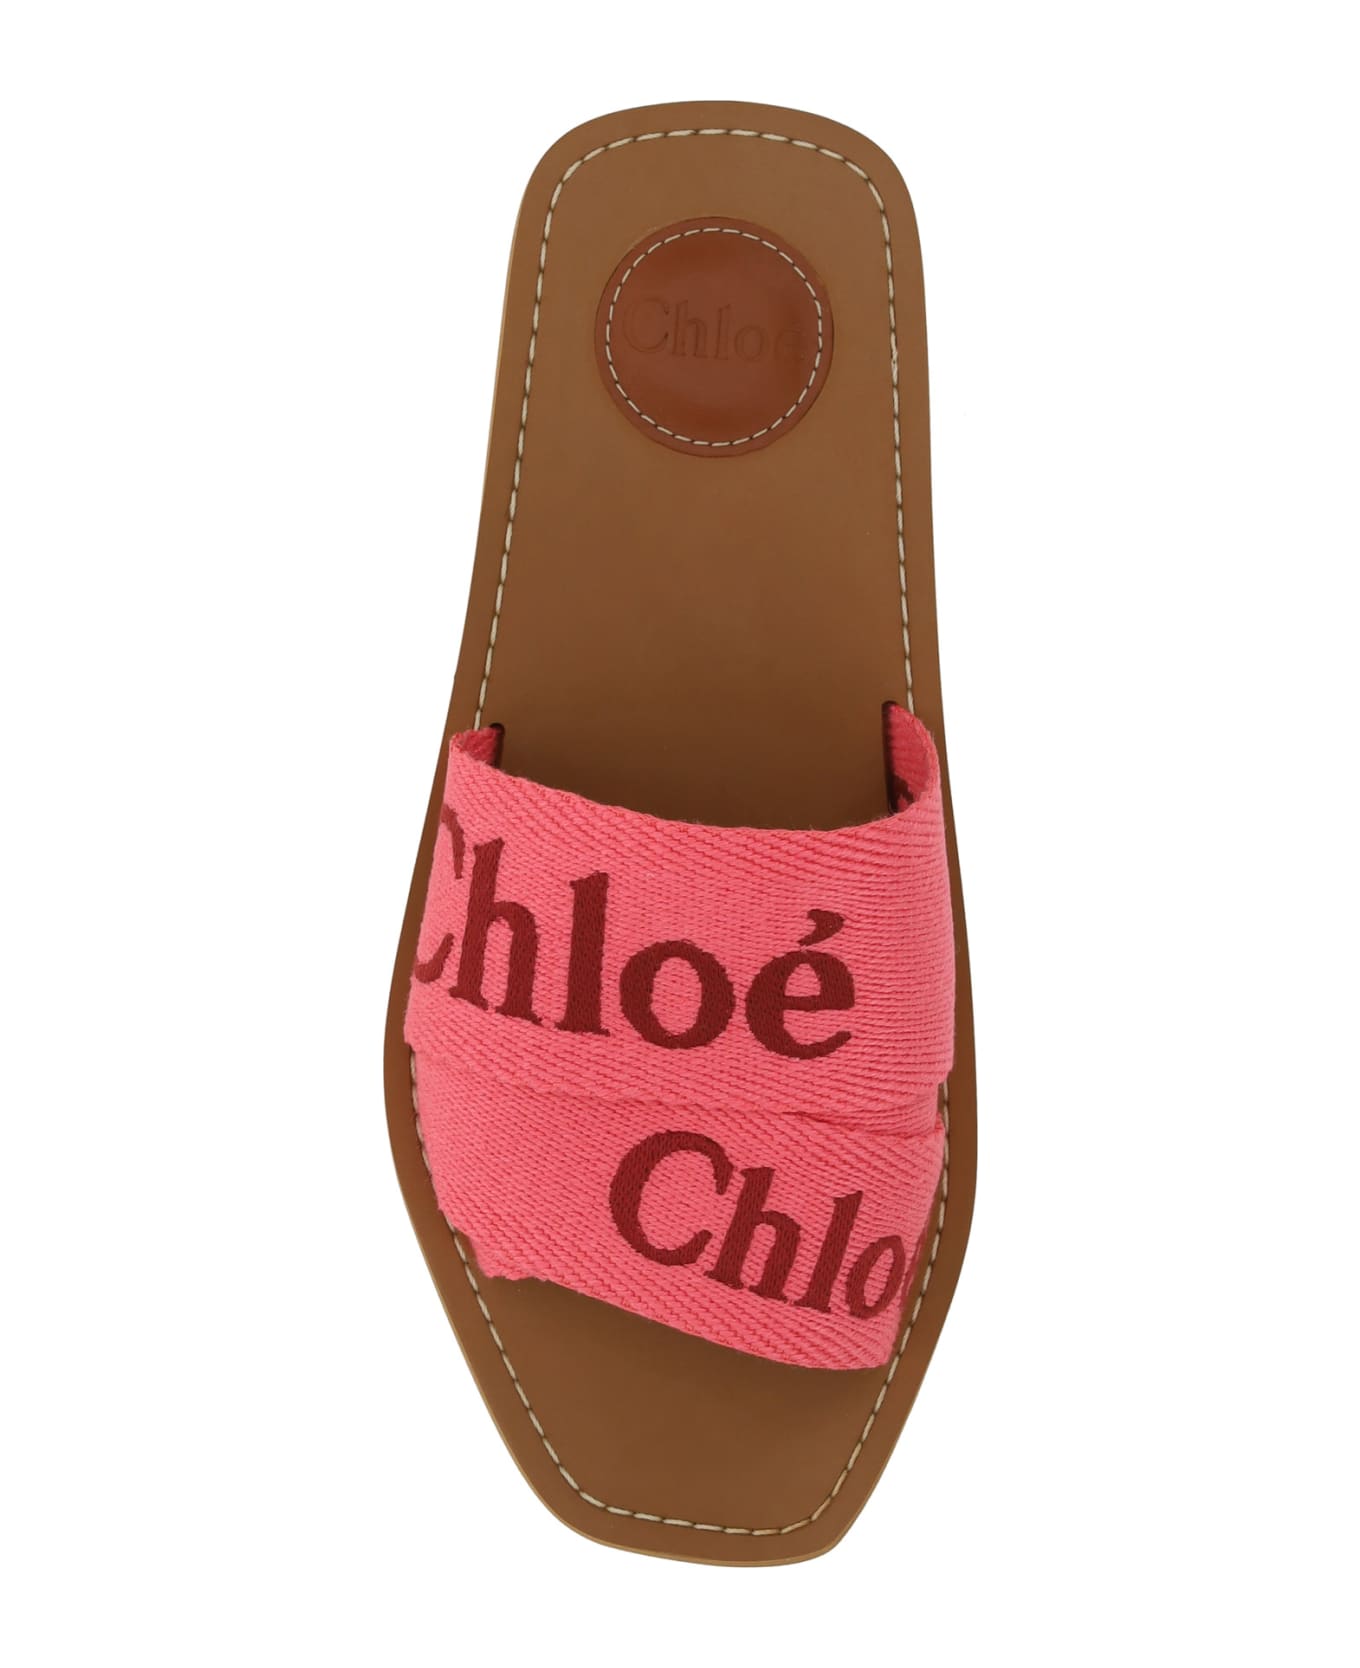 Chloé Woody Sandals - Pink - Red サンダル